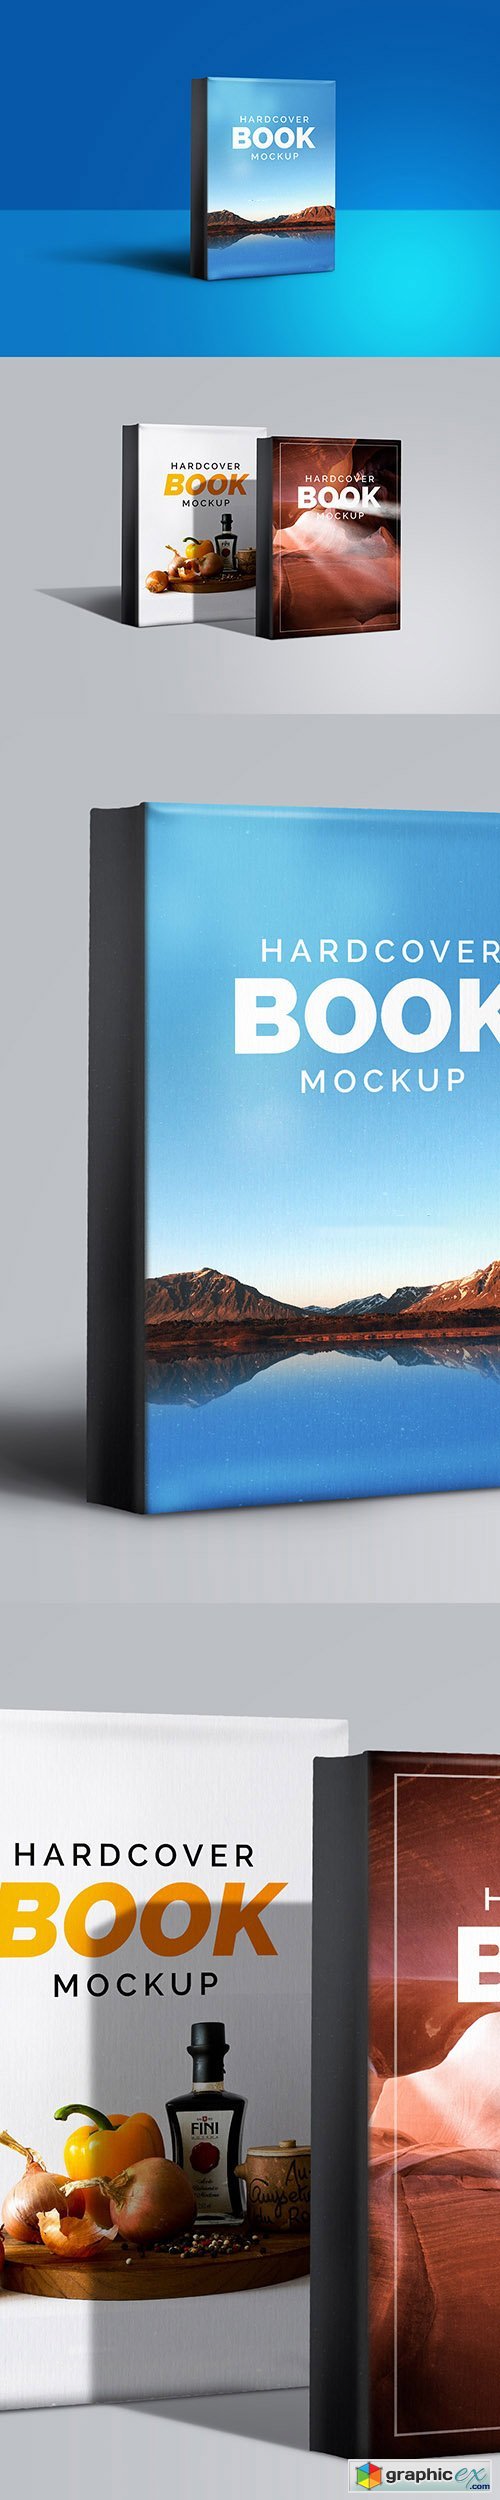 PSD Mock-Up's - Hardcover Book 2016